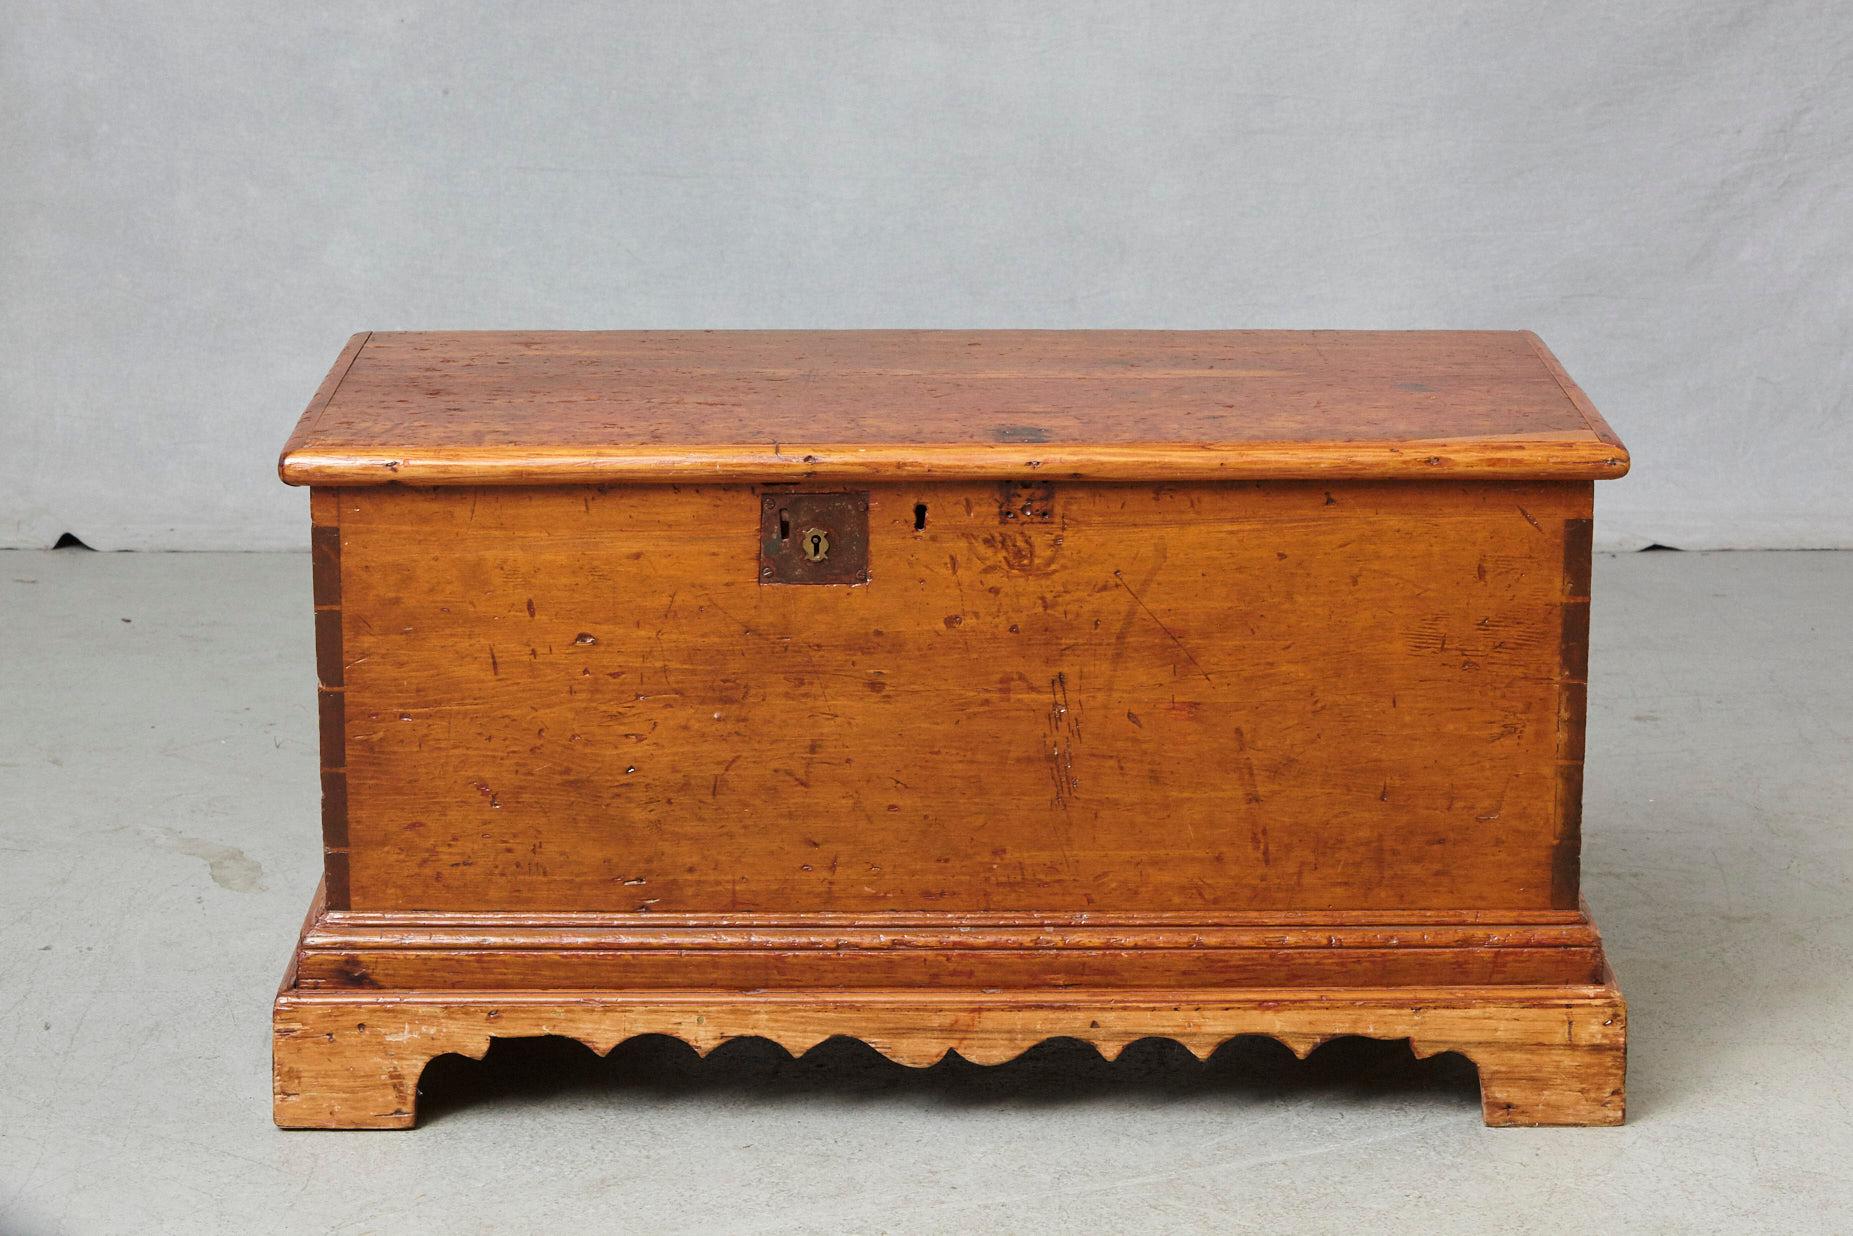 Early 19th century American pine chest or trunk, circa 1820s, probably from New England.
Beautiful dovetail construction, original hardware and hand-carved apron. 
Name of the former owner 